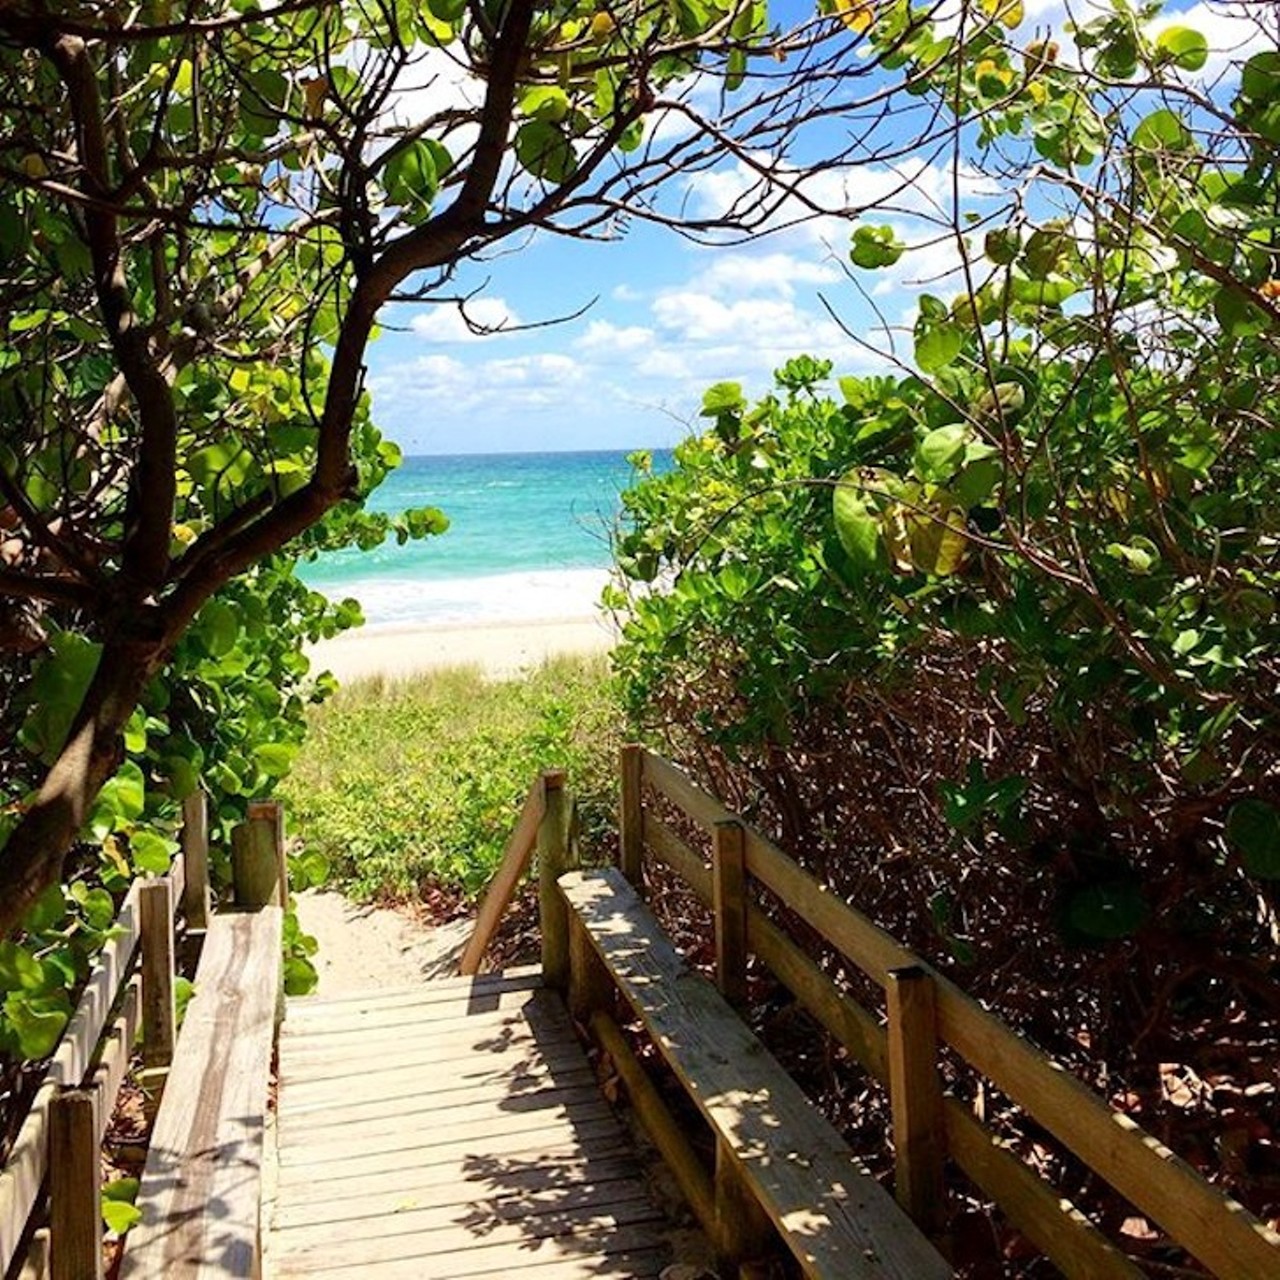 JUNO BEACH
There's not much room to complain when the beach is free to roam on and the sand looks pretty damn white. Pack a basket and grab shade under a picnic shelter, or hustle over to the dog areas with your short-legged bud for some off-leash fun.
Distance: 2 hours and 23 minutes
Photo via laylavonathey/Instagram